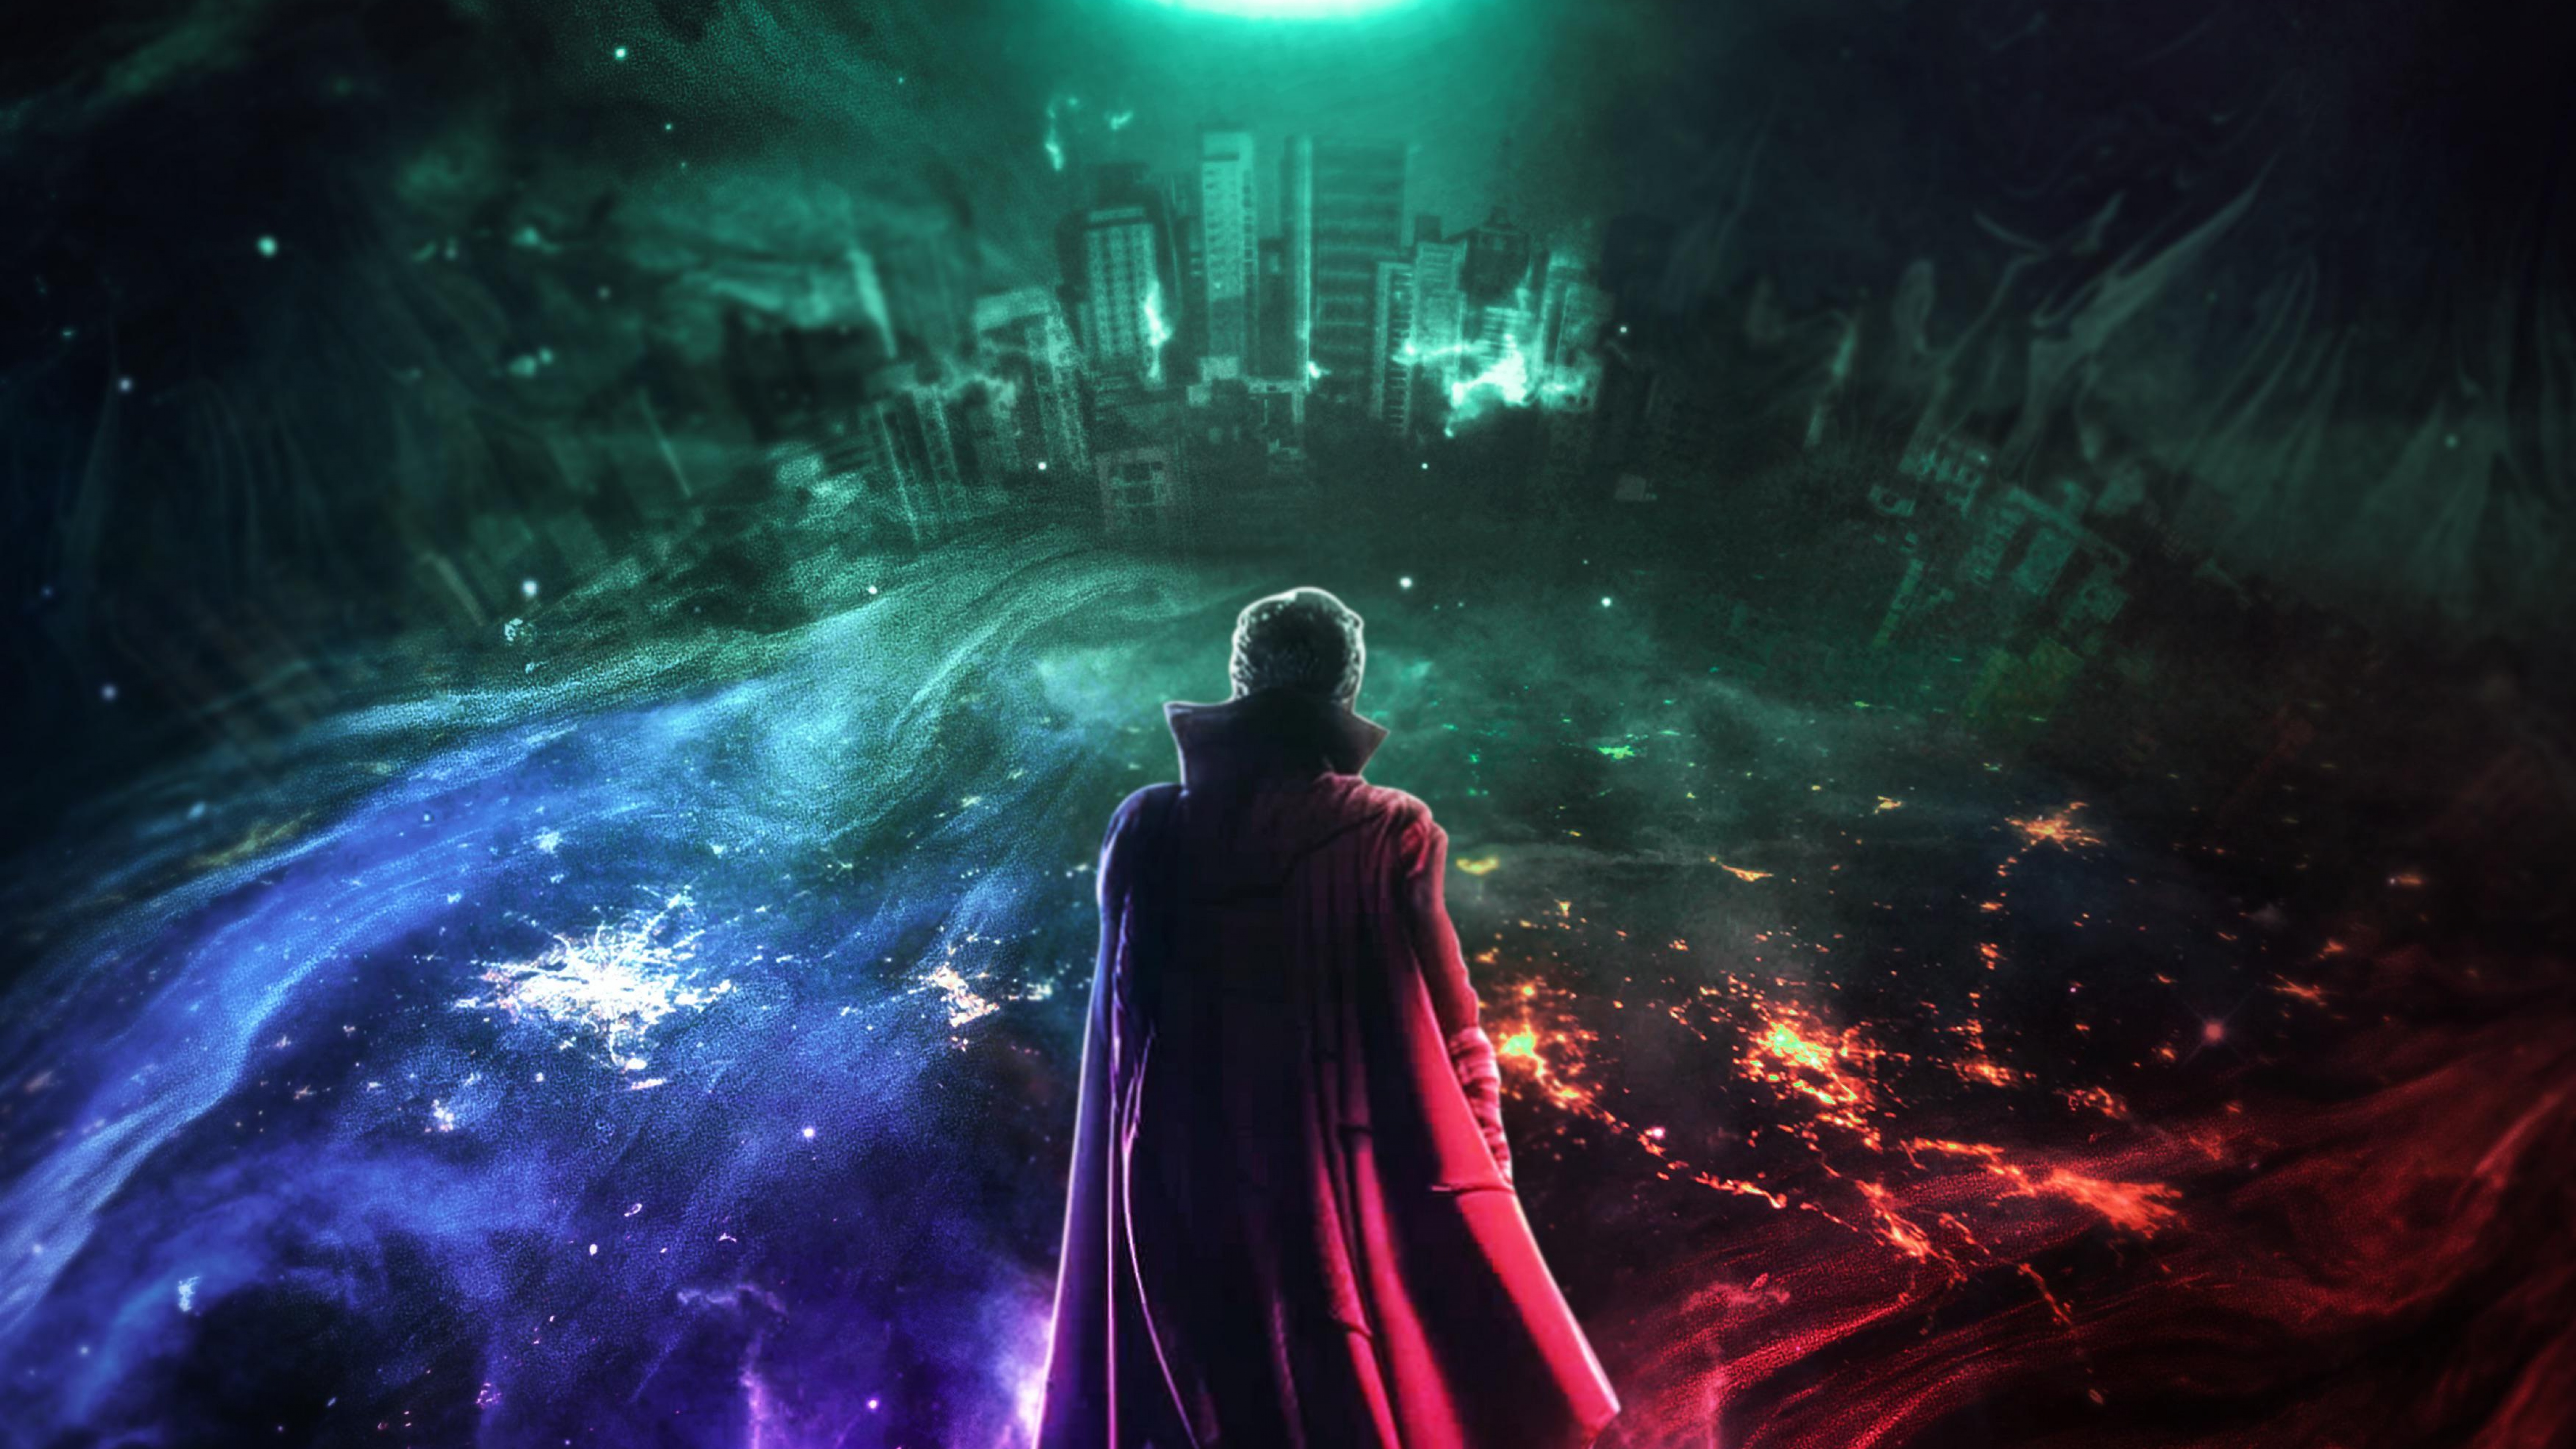 Doctor Strange in the Multiverse of Madness Wallpaper 4K, 2022 Movies,  Movies, #990